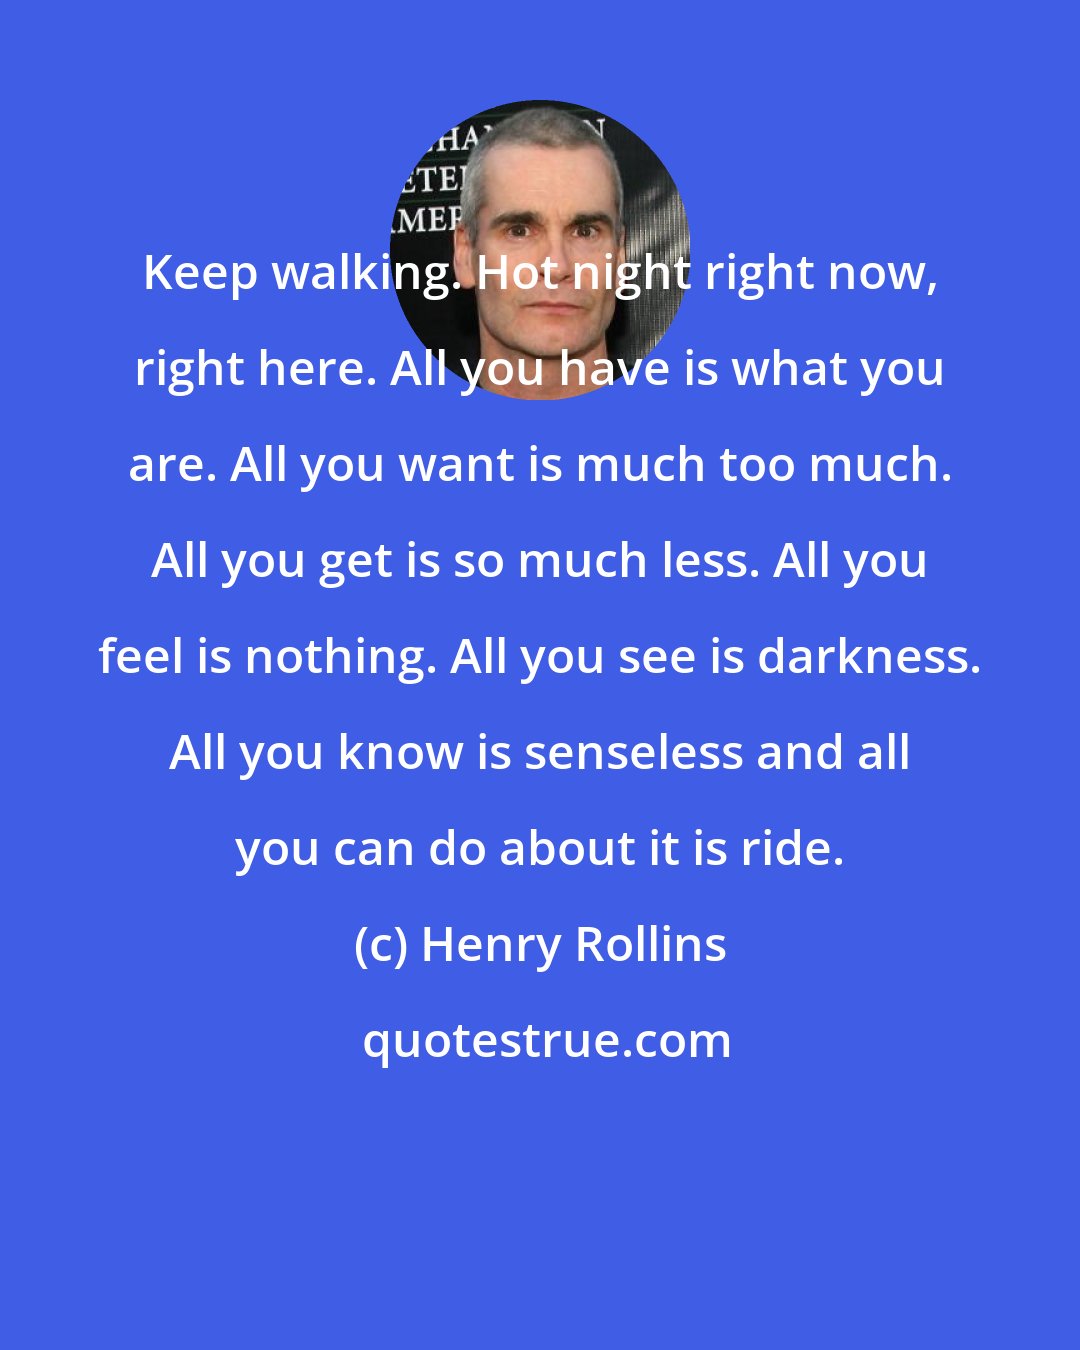 Henry Rollins: Keep walking. Hot night right now, right here. All you have is what you are. All you want is much too much. All you get is so much less. All you feel is nothing. All you see is darkness. All you know is senseless and all you can do about it is ride.